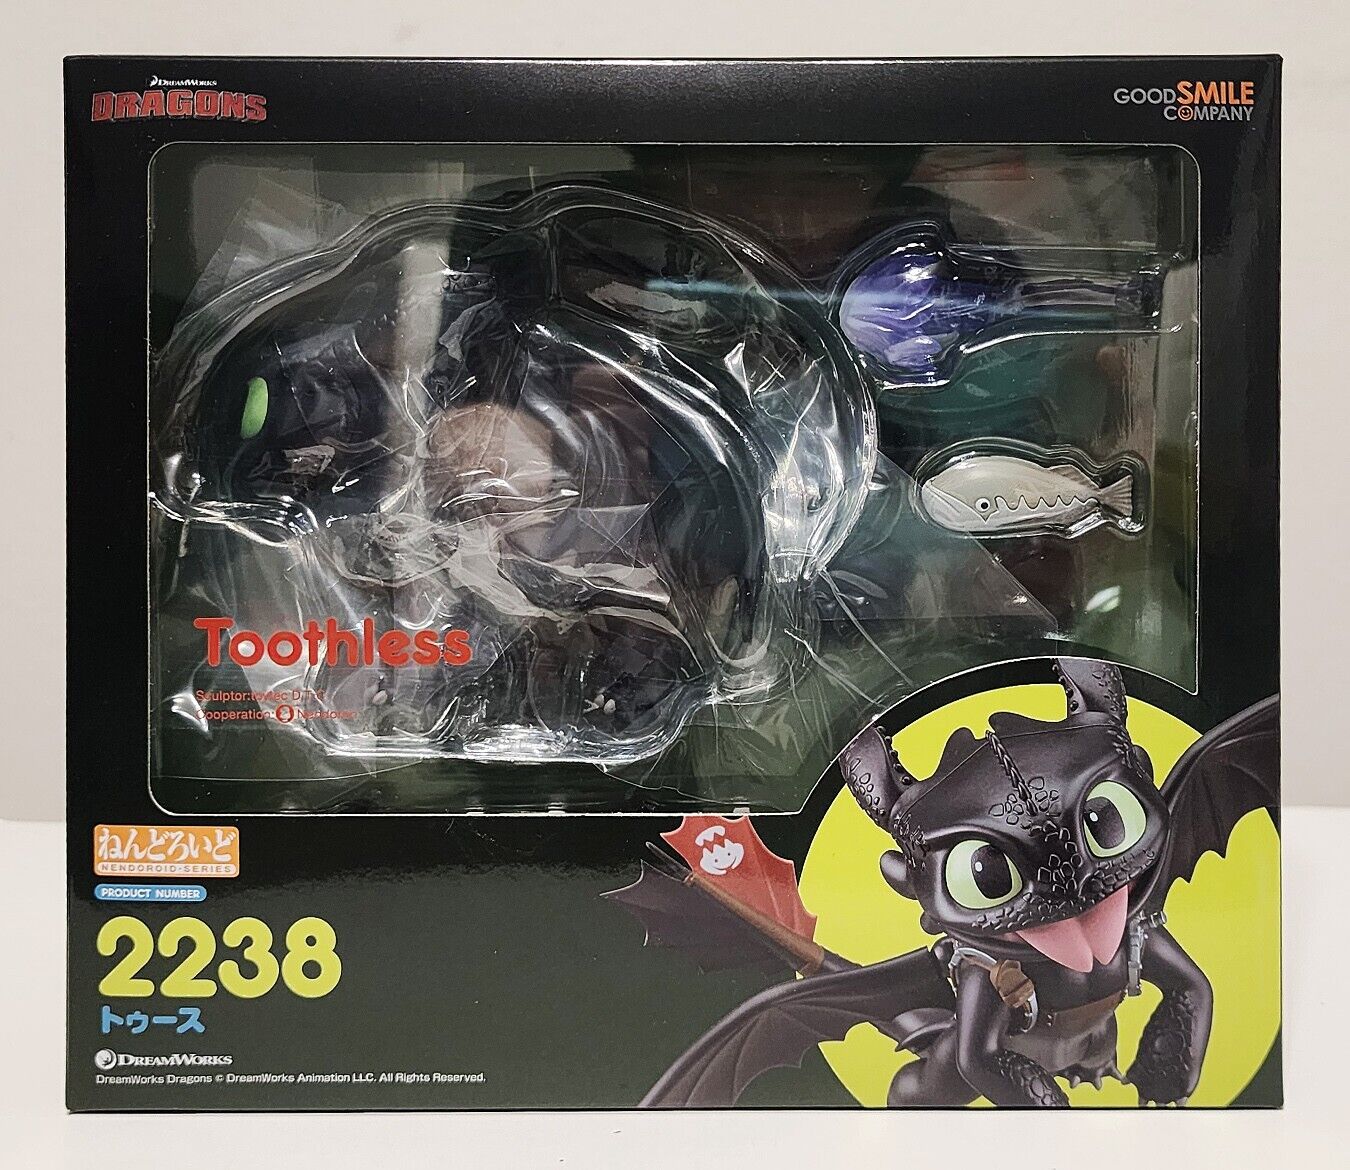 [US Seller] New Good Smile Company Nendoroid #2238 - HTTYD (Toothless)